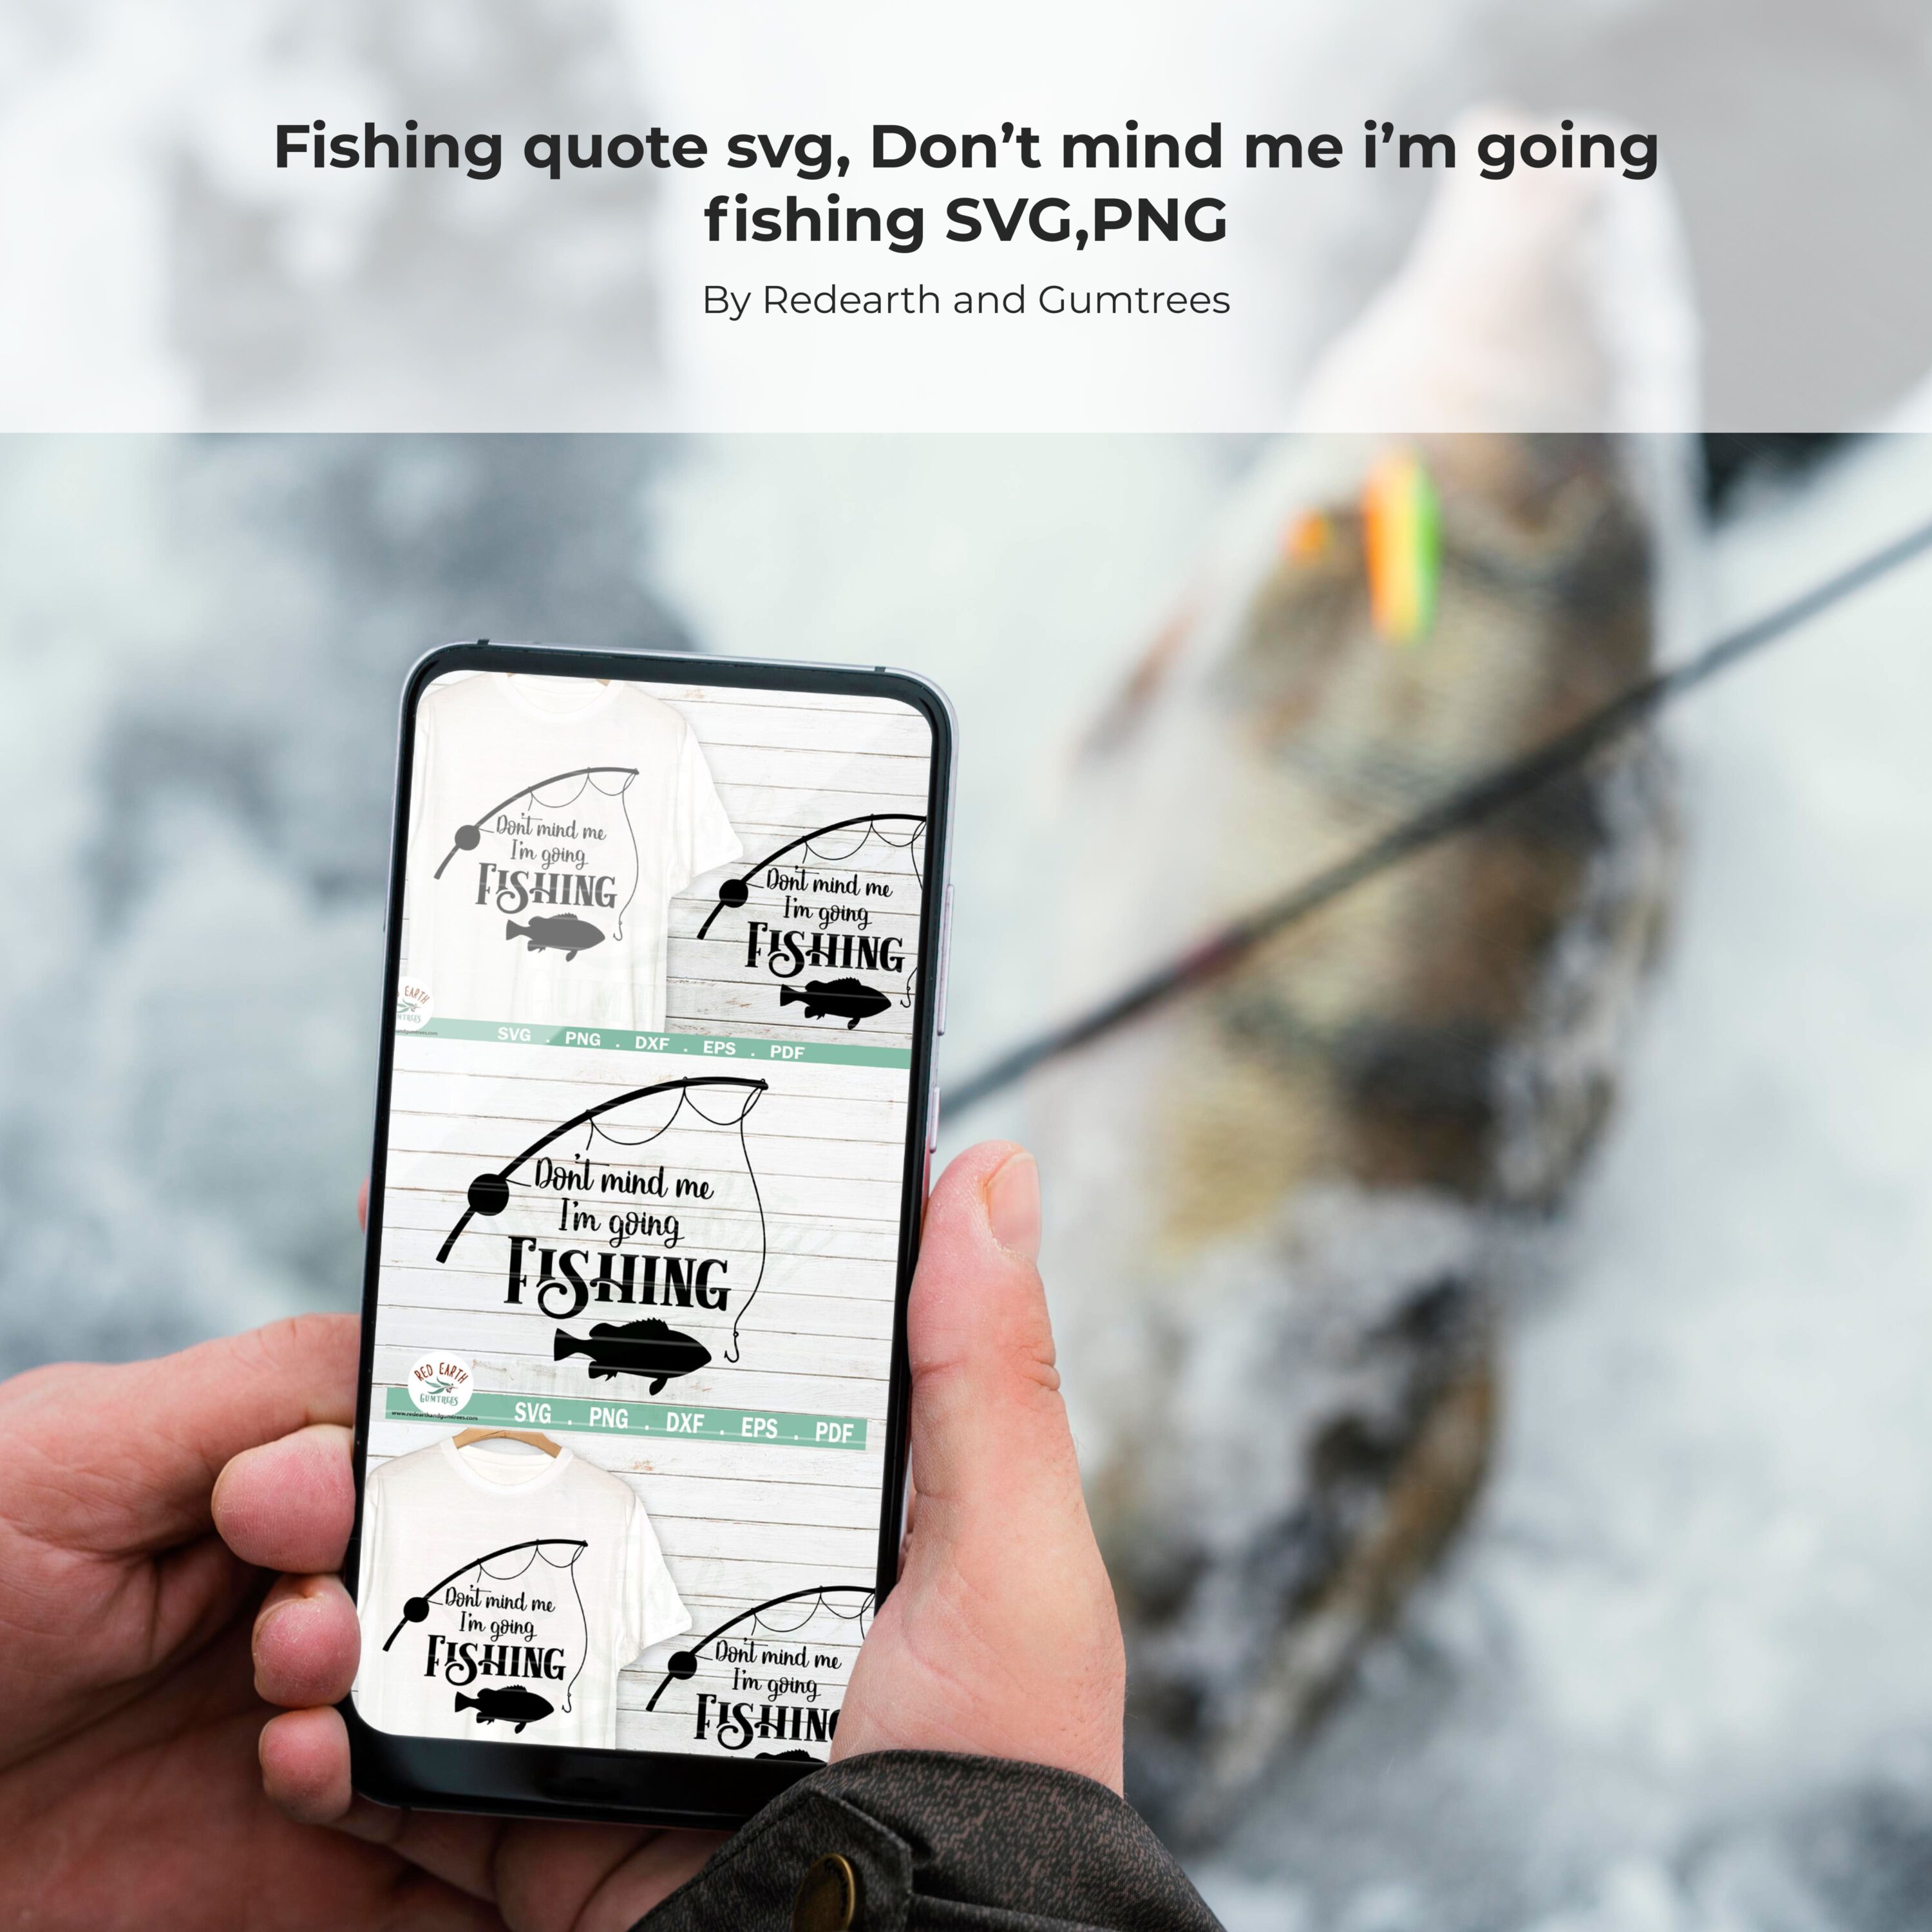 Fishing quote svg, Don’t mind me i’m going fishing SVG,PNG cover.